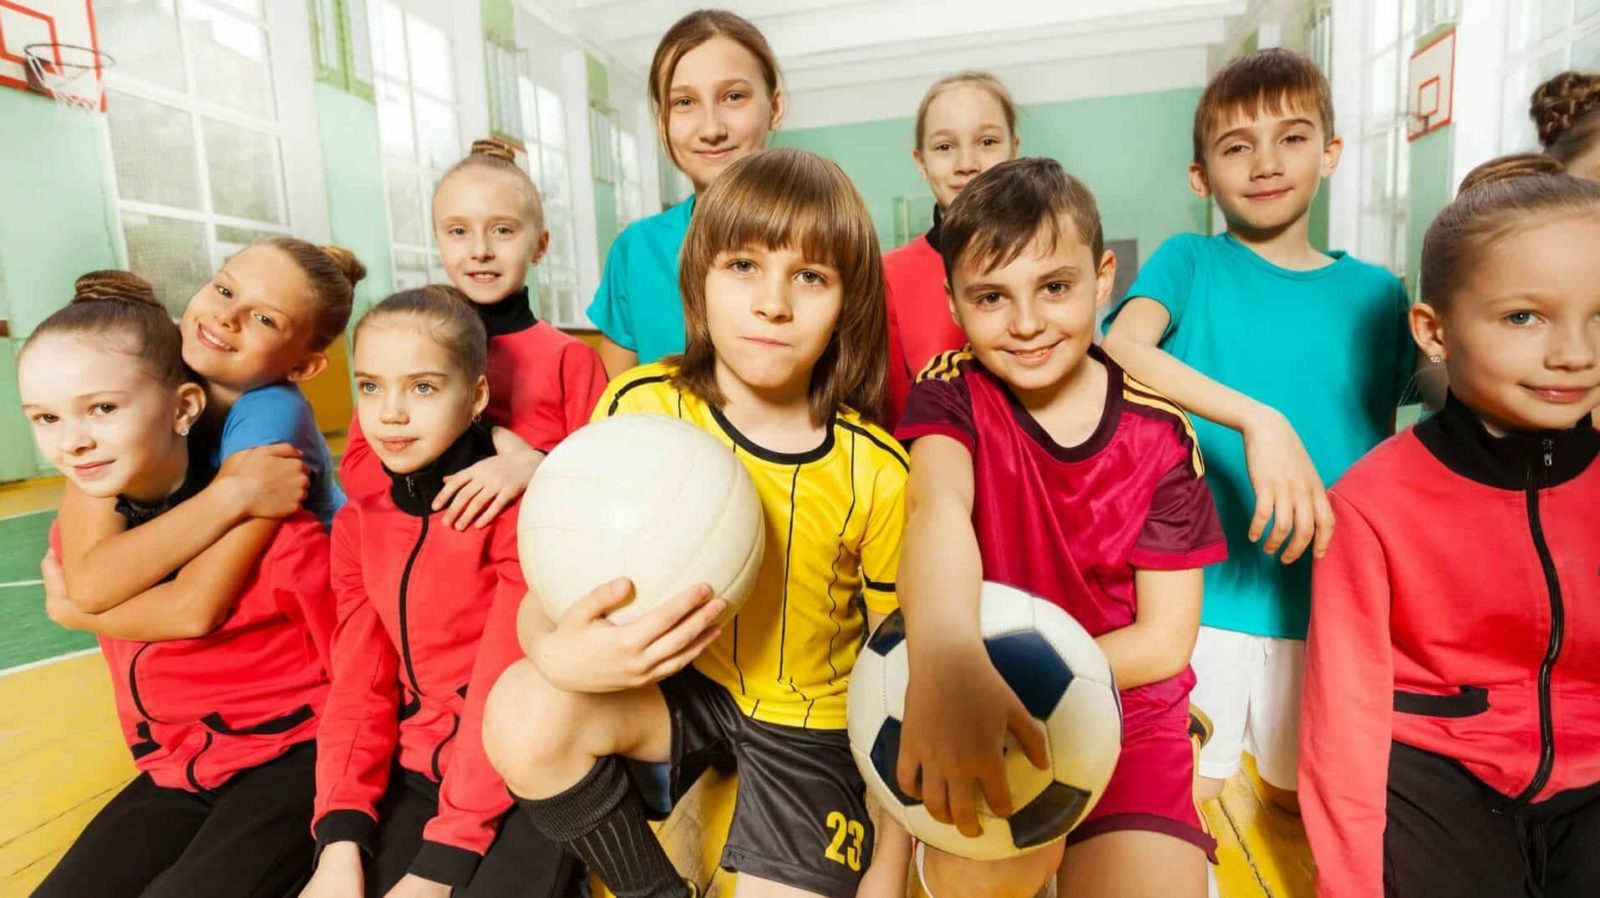 The Benefits of Physical Education (PE) Classes in School - All